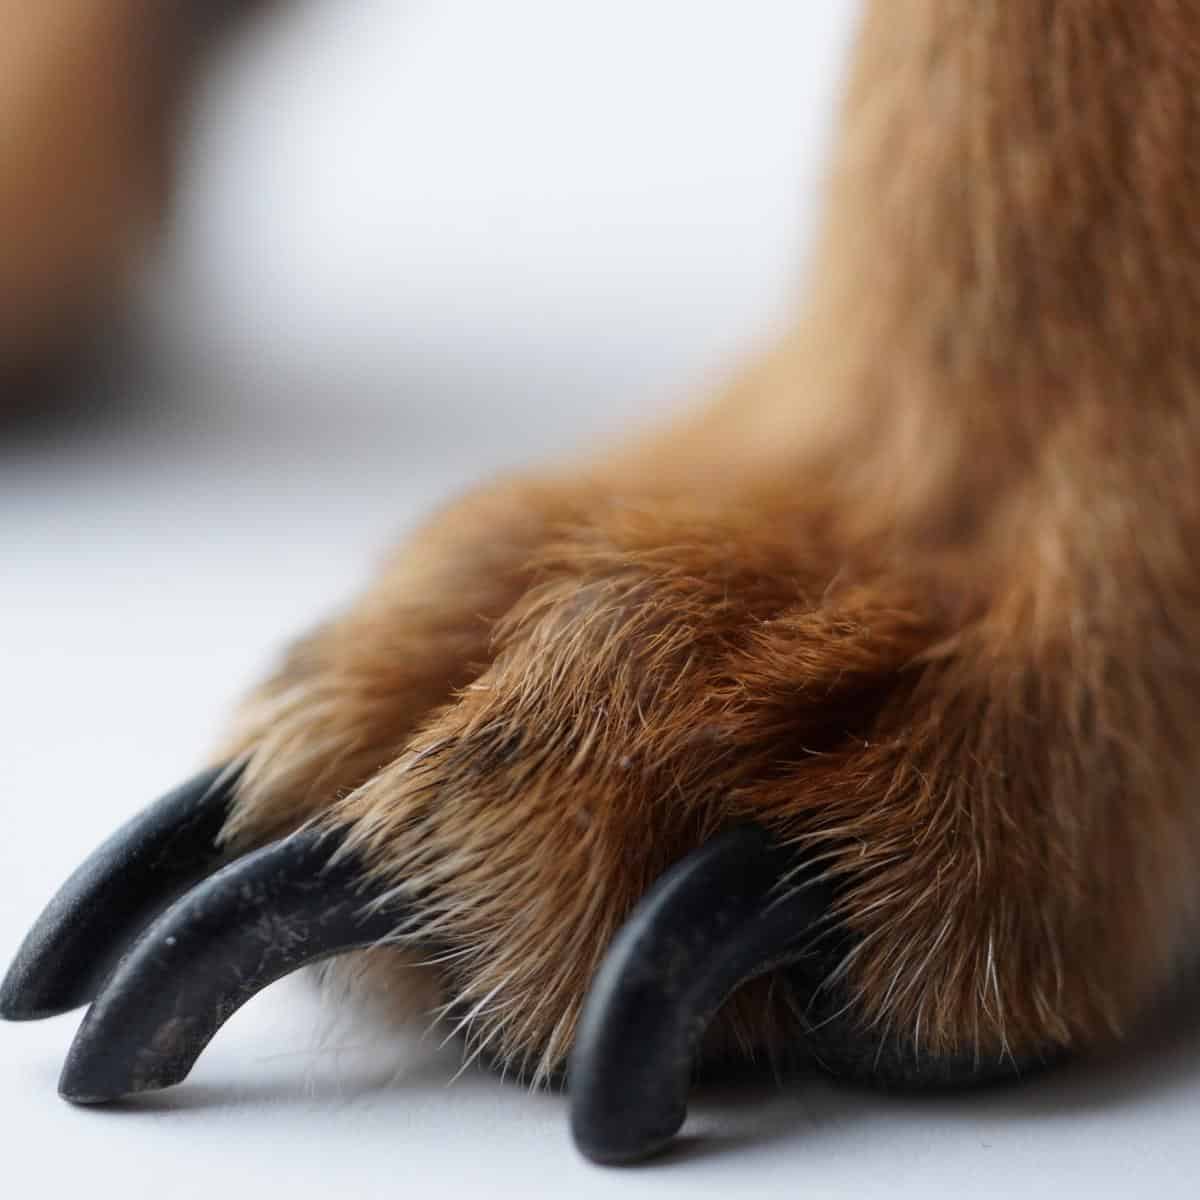 How To Trim Overgrown Dog Nails - Doggie HQ